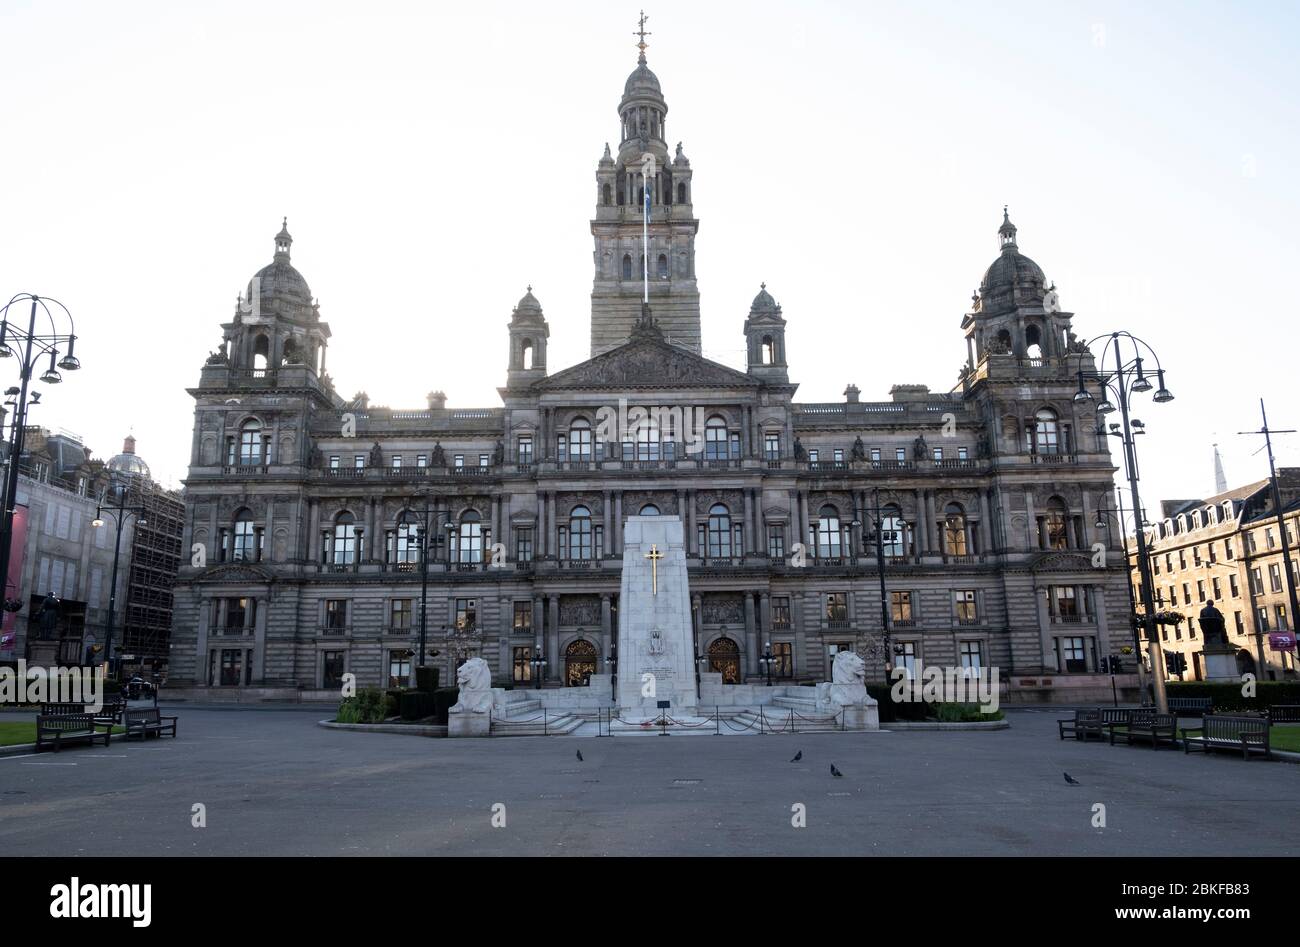 George square in Glasgow during the Covid-19 lockdown. Stock Photo